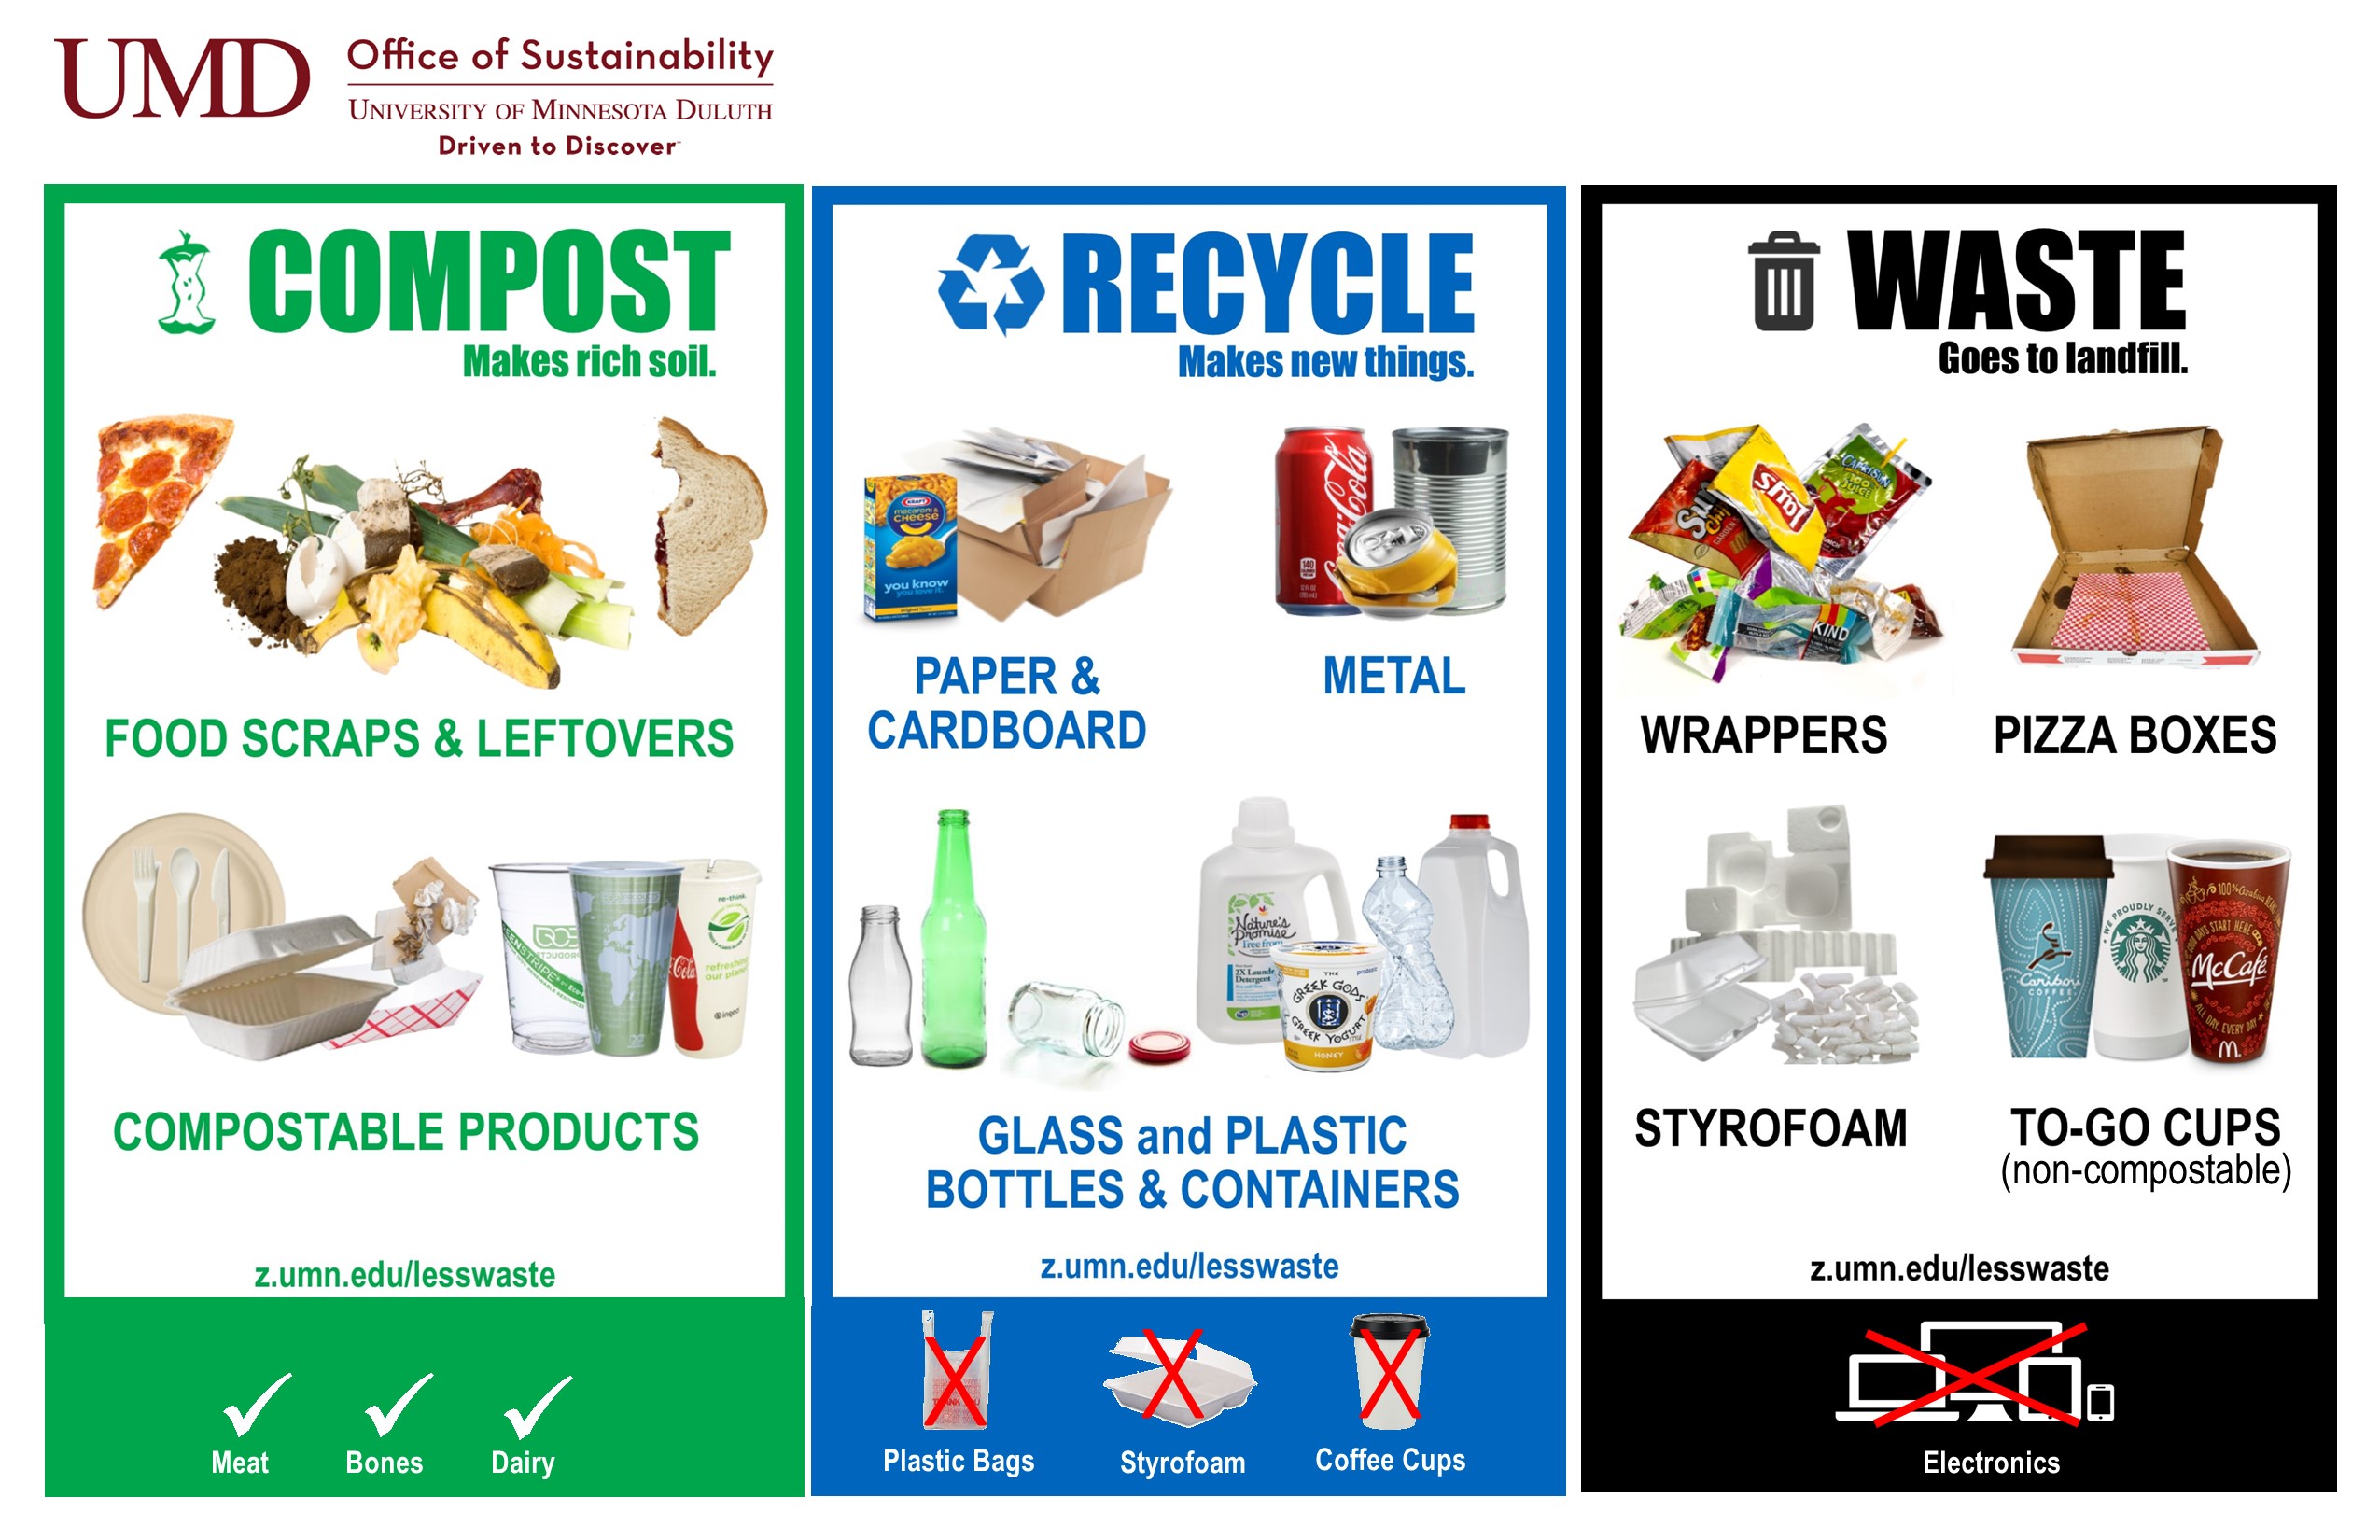 Compost-Recycle-Waste poster